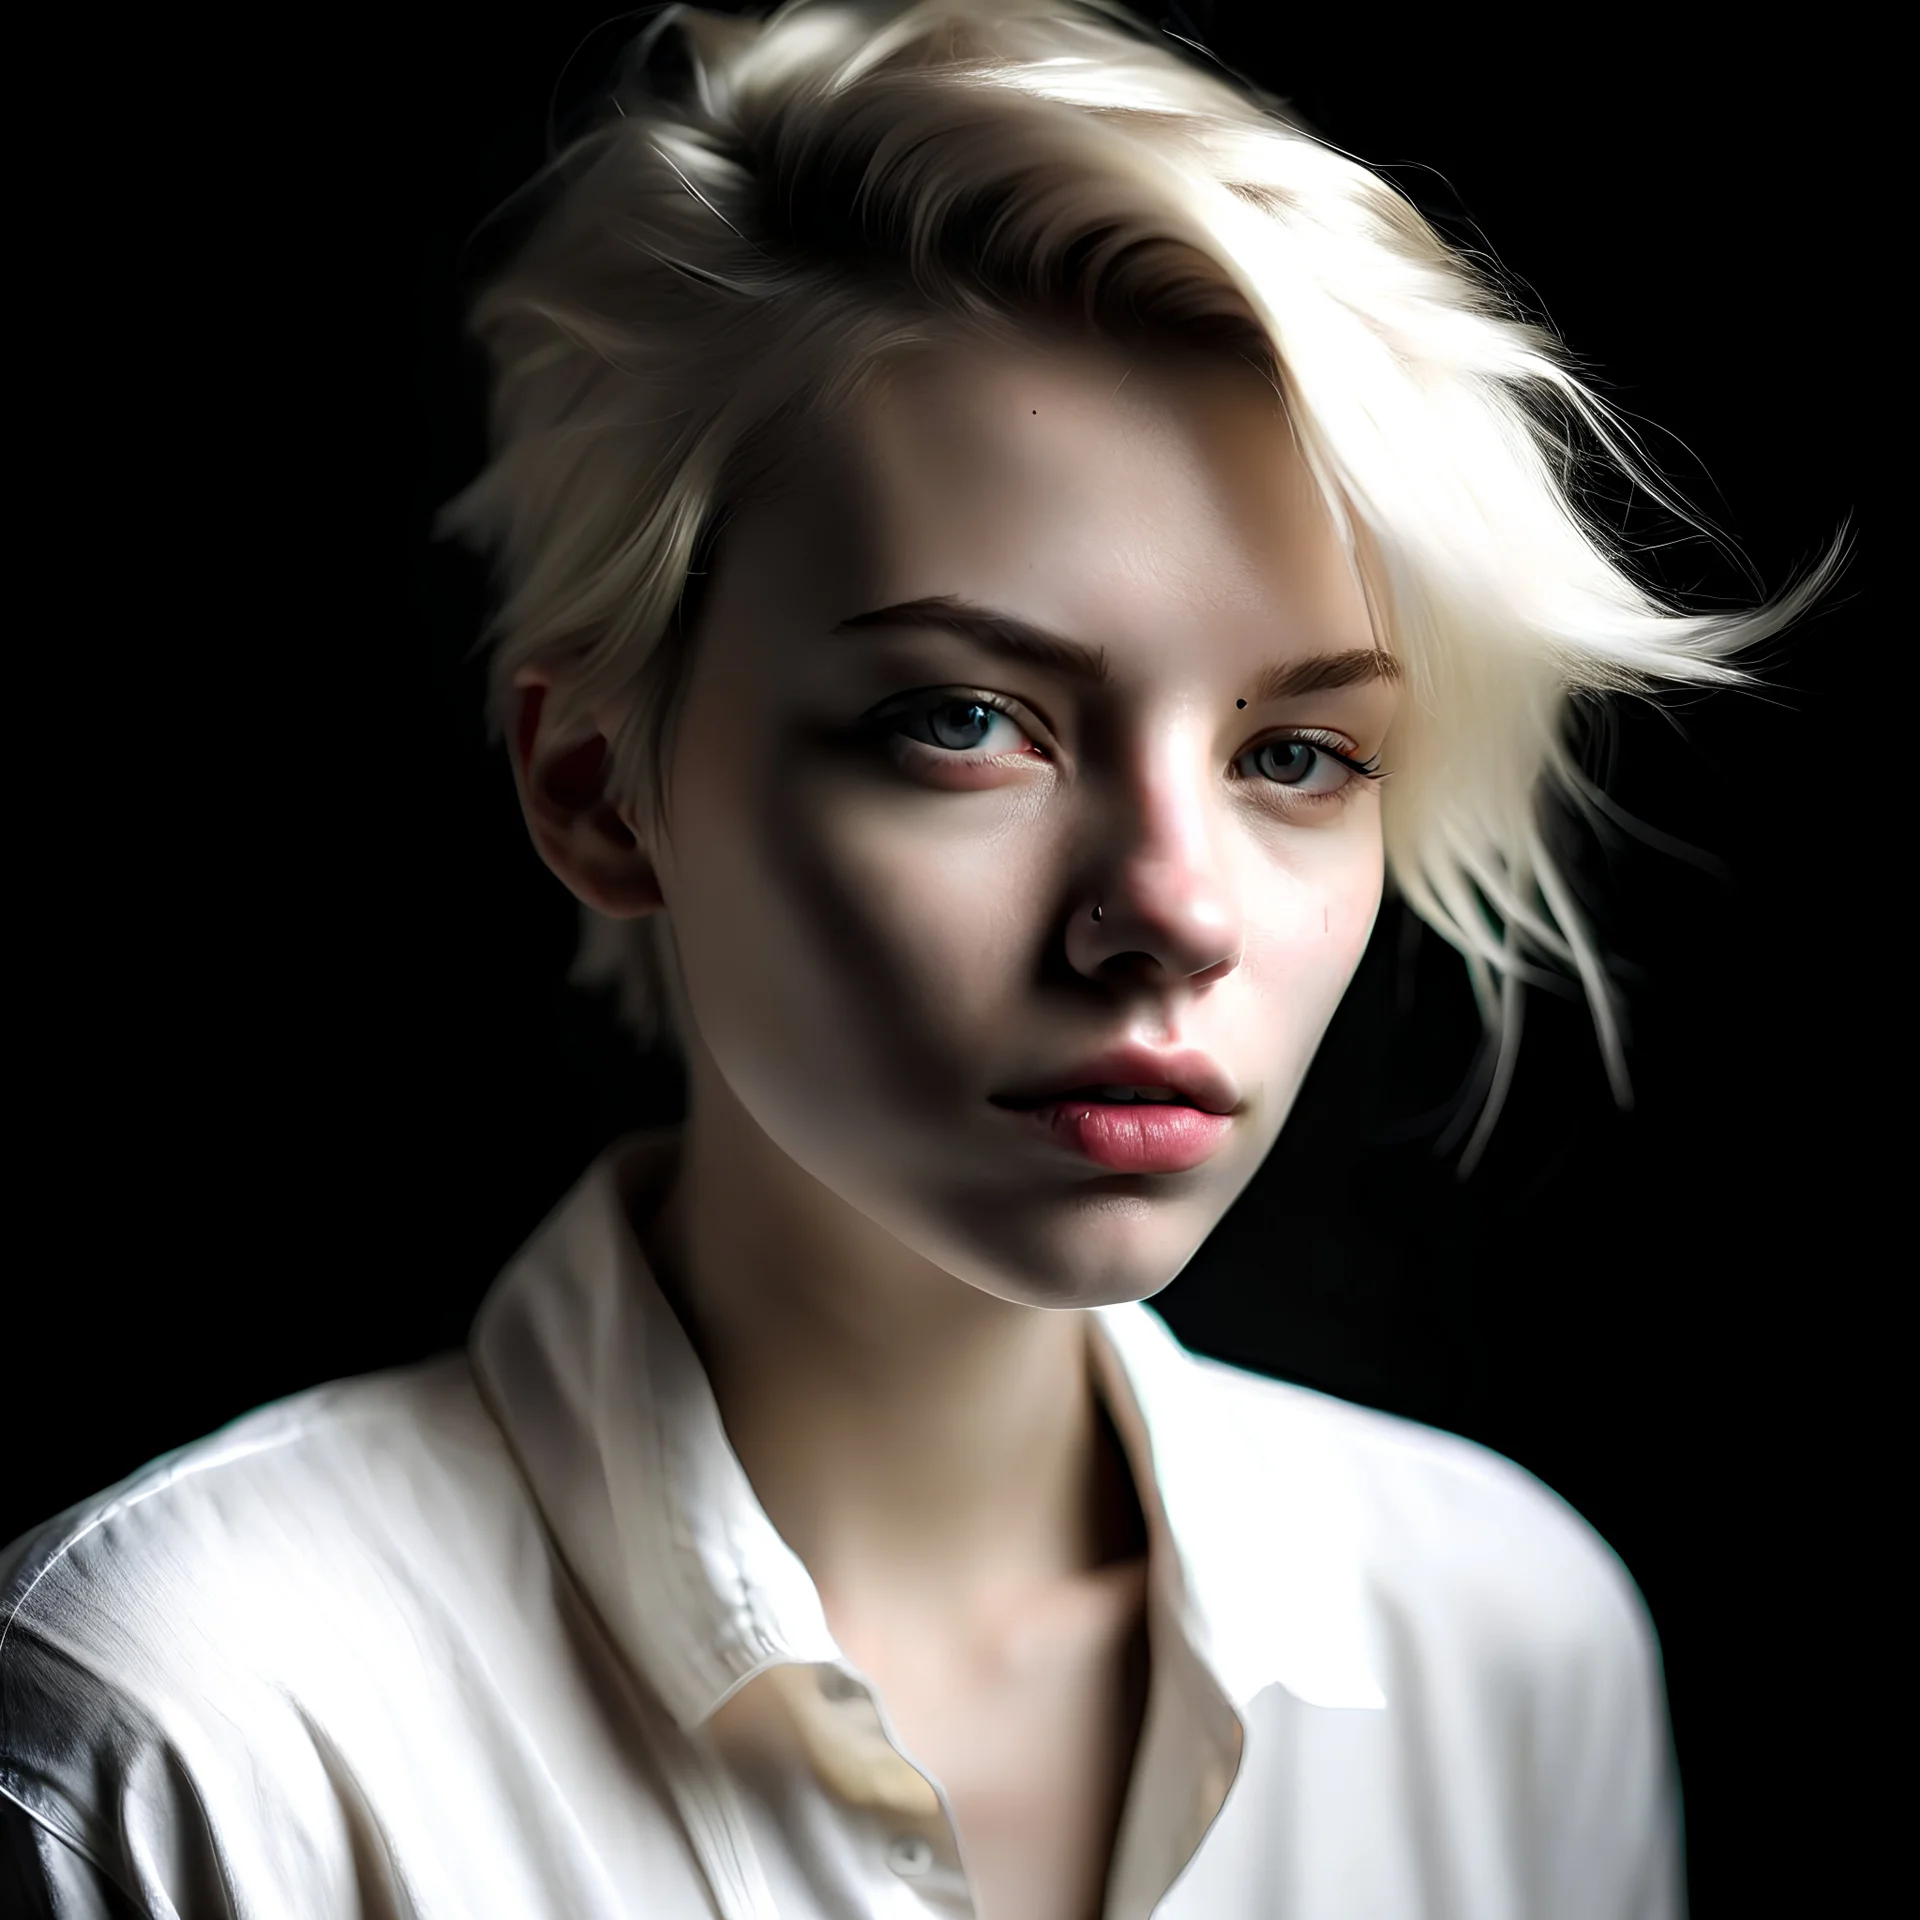 woman, twenty years old, white blond shortish hair, dark grey eyes, light pale skin, rose lips whithe shirt, portrait, close up, beatiful young woman, many shadows, hair tied up, loose strands framing face, little make up, ferfect skin, defying expression, chin pointed up, wild hair